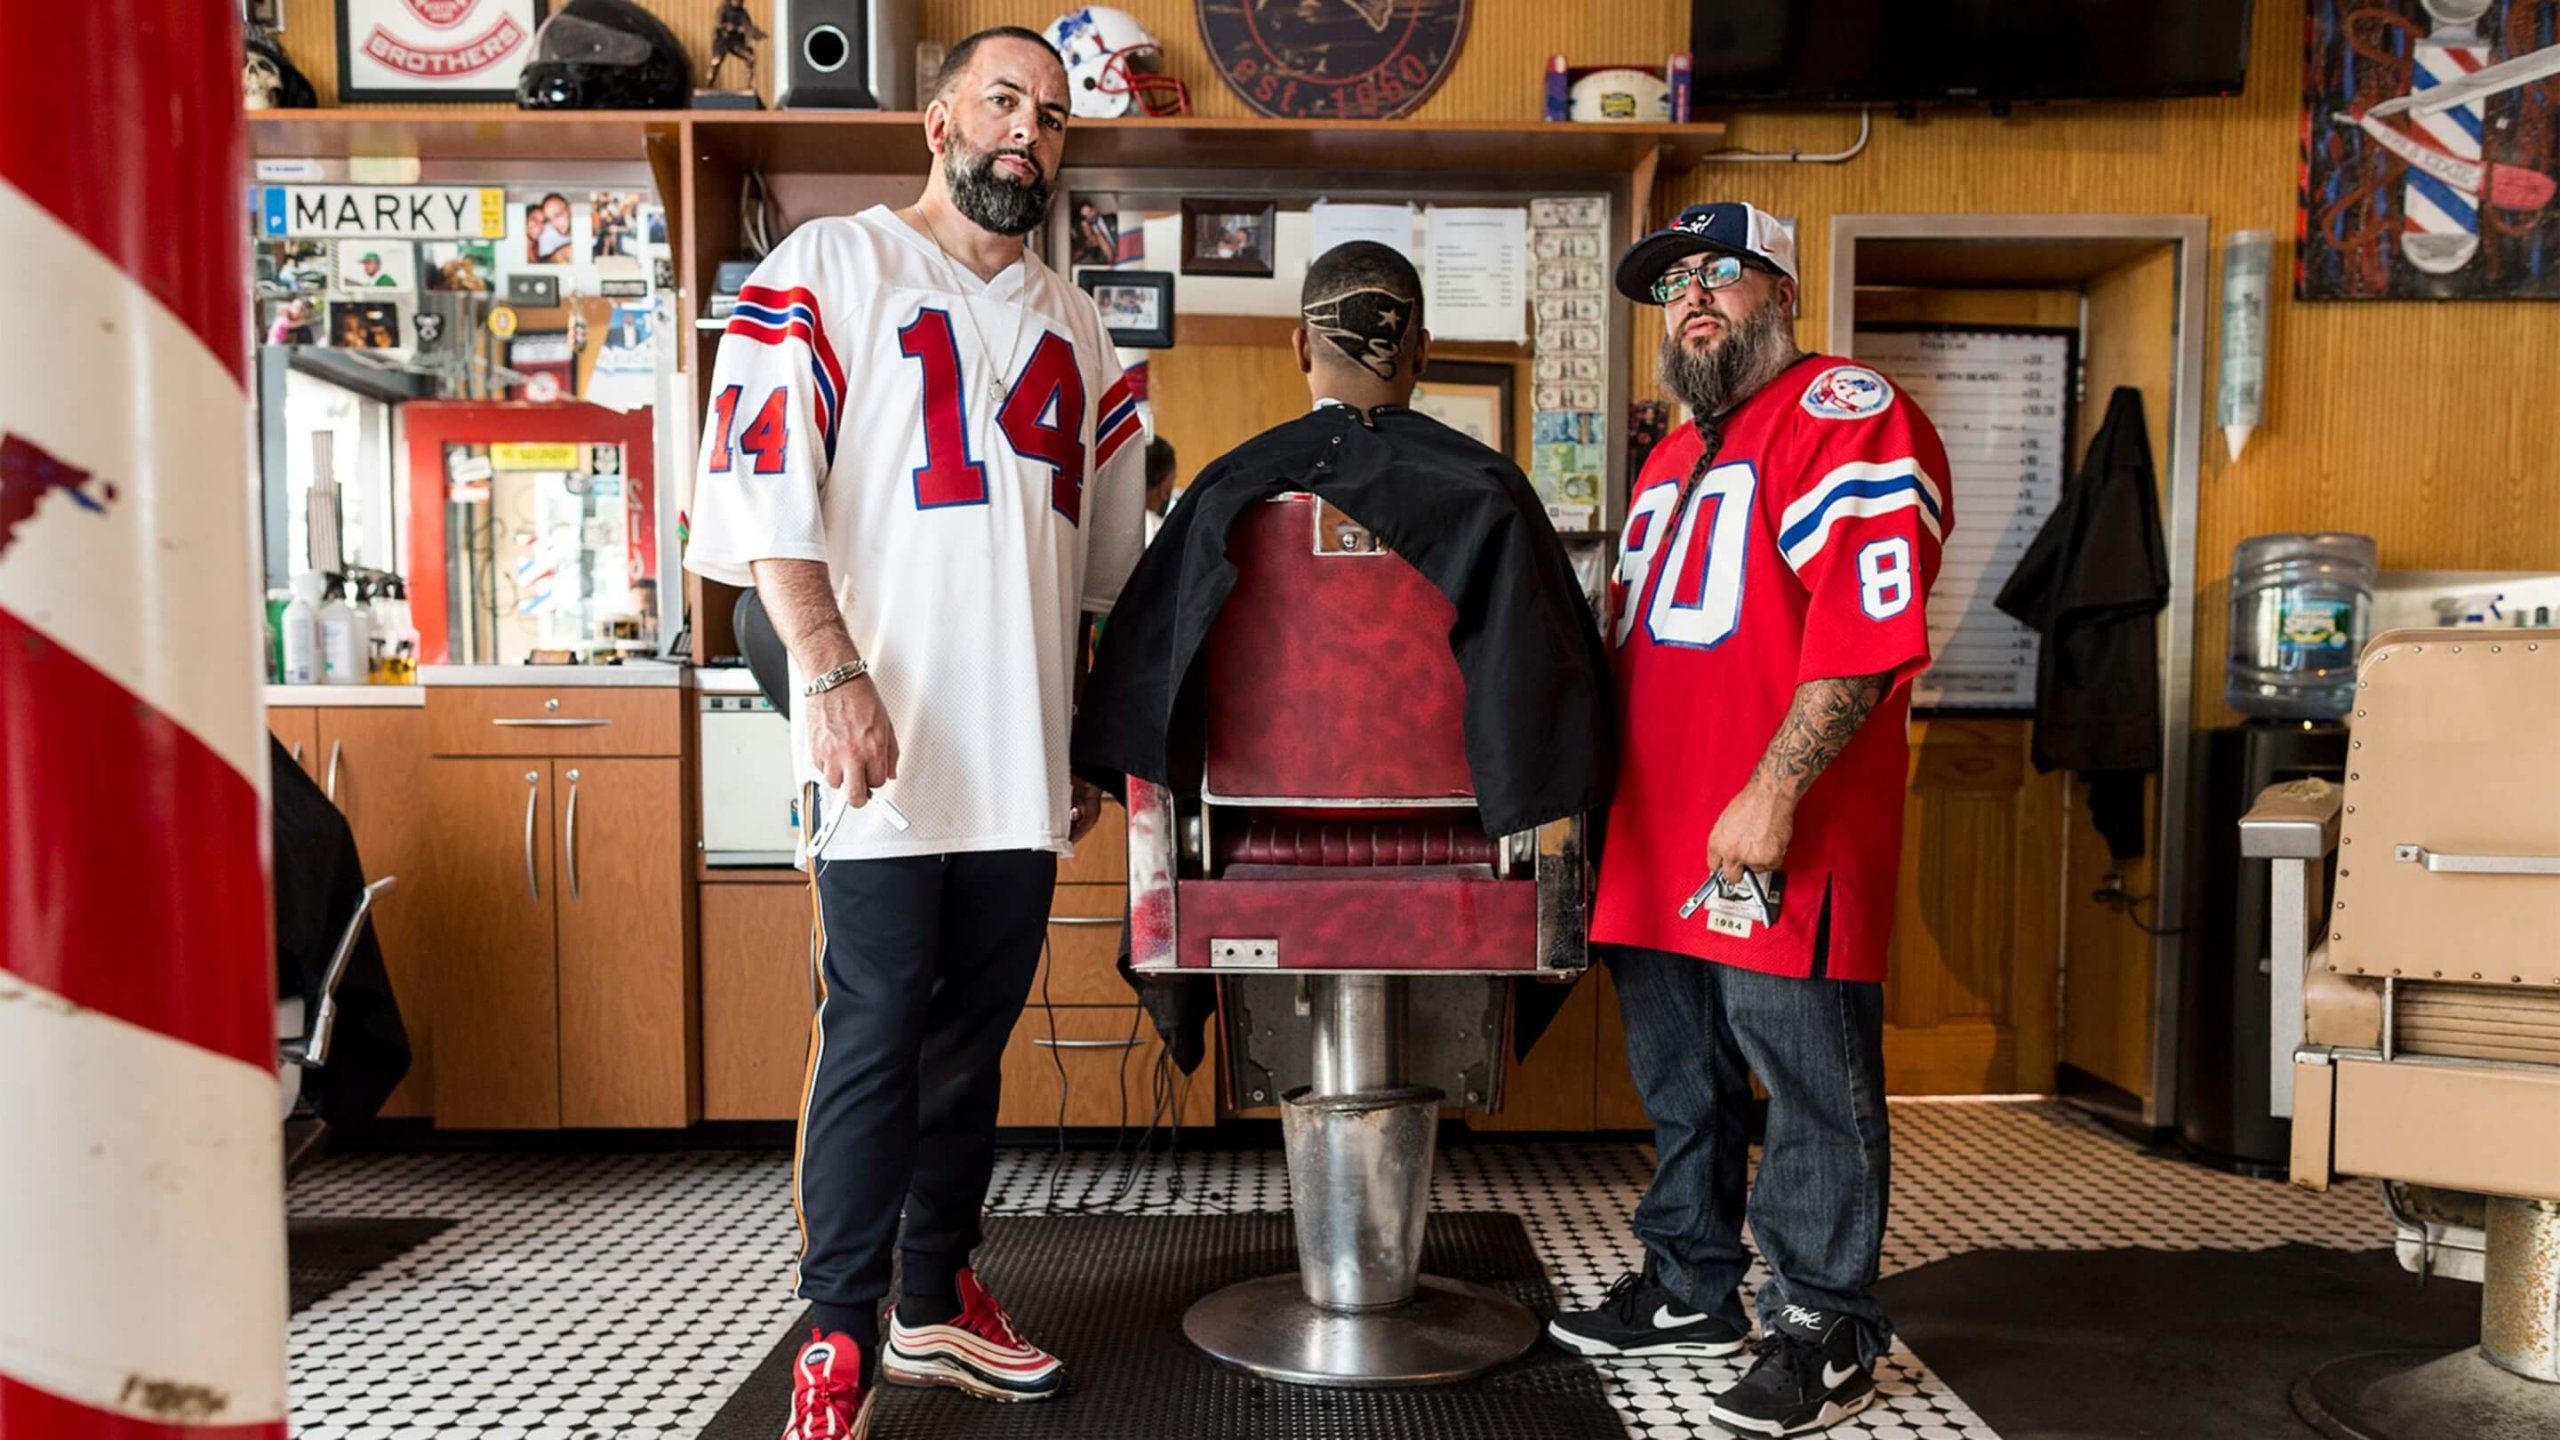 New England Patriots logo shaved into back of head of man sitting in barber stool with two barbers in Patriots Jerseys next to him